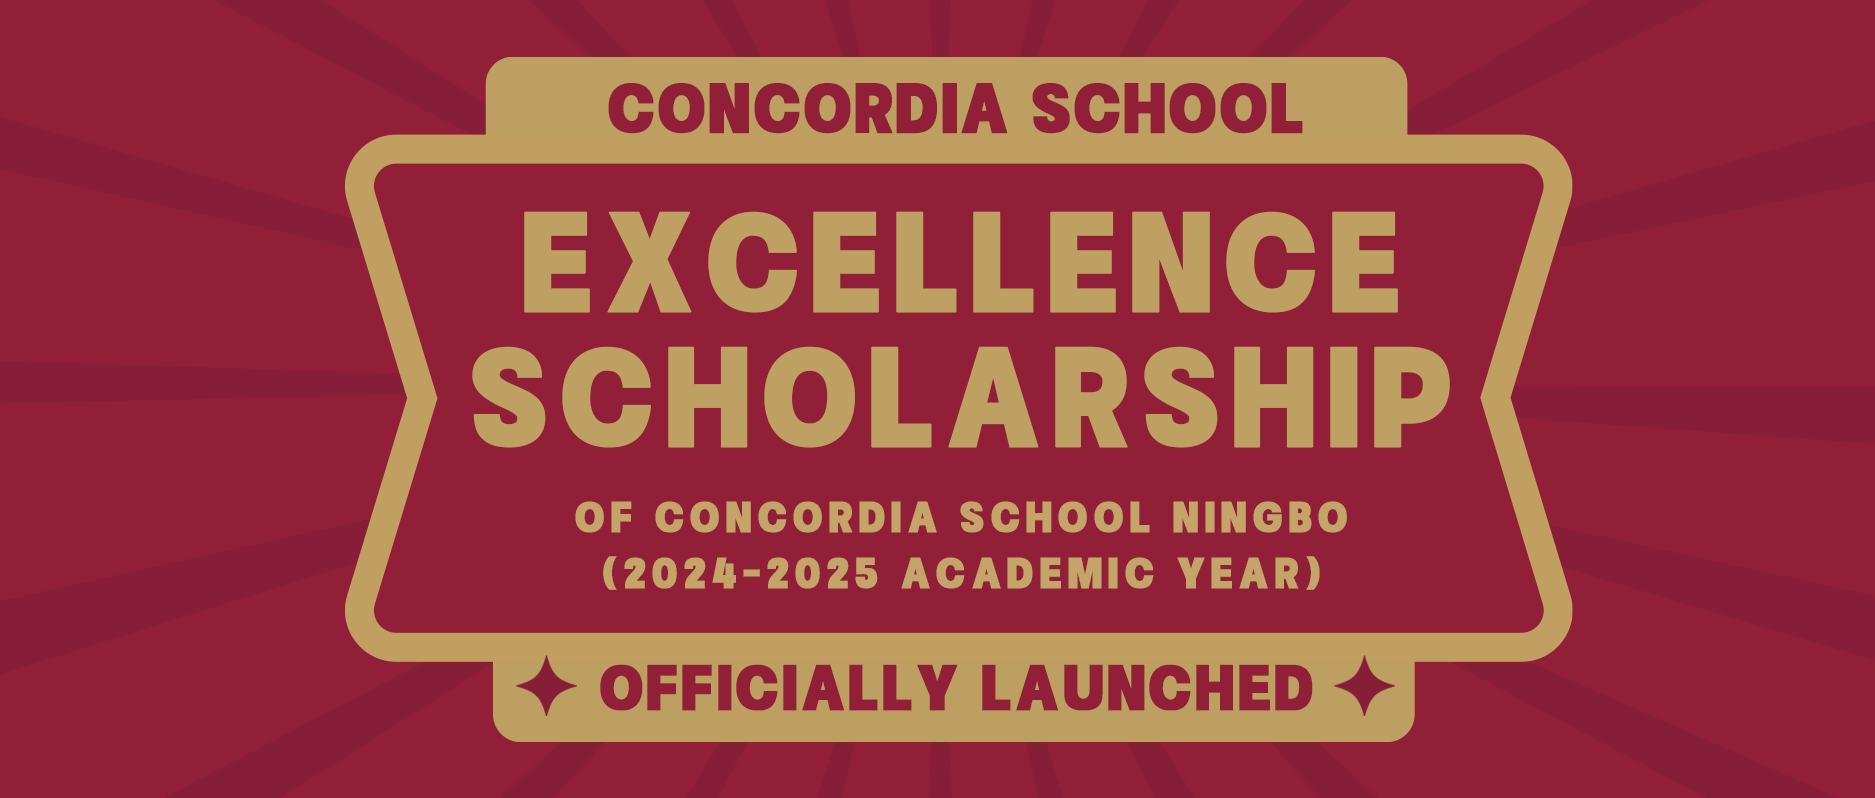 APPLICATION FOR EXCELLENCE SCHOLARSHIP OF CISN!